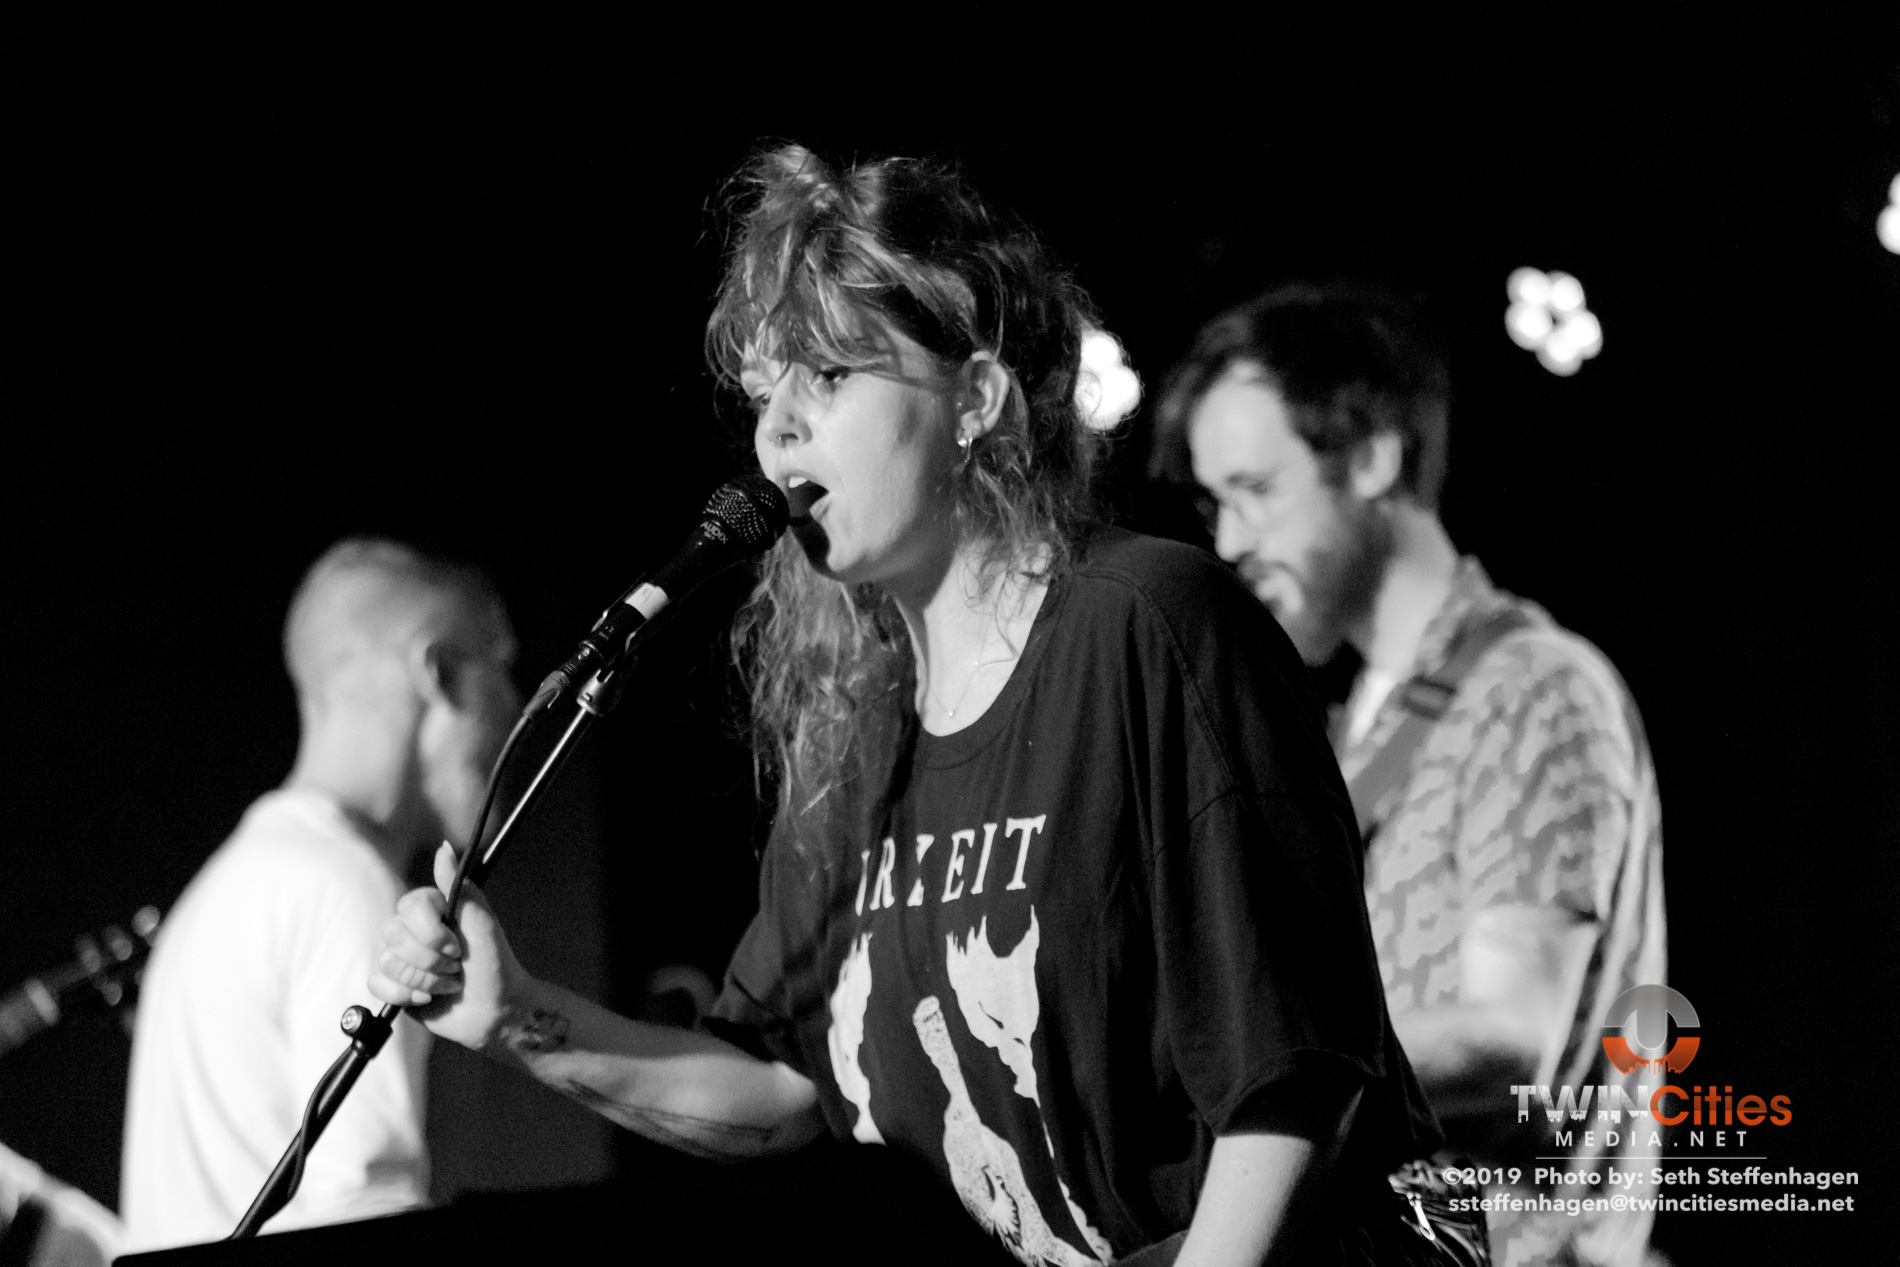 March 27, 2019 - Saint Paul, Minnesota, United States - Thou and Emma Ruth Rundle live in concert at the Turf Club along with False, Gorgus and Without as the openers.

(Photo by Seth Steffenhagen/Steffenhagen Photography)